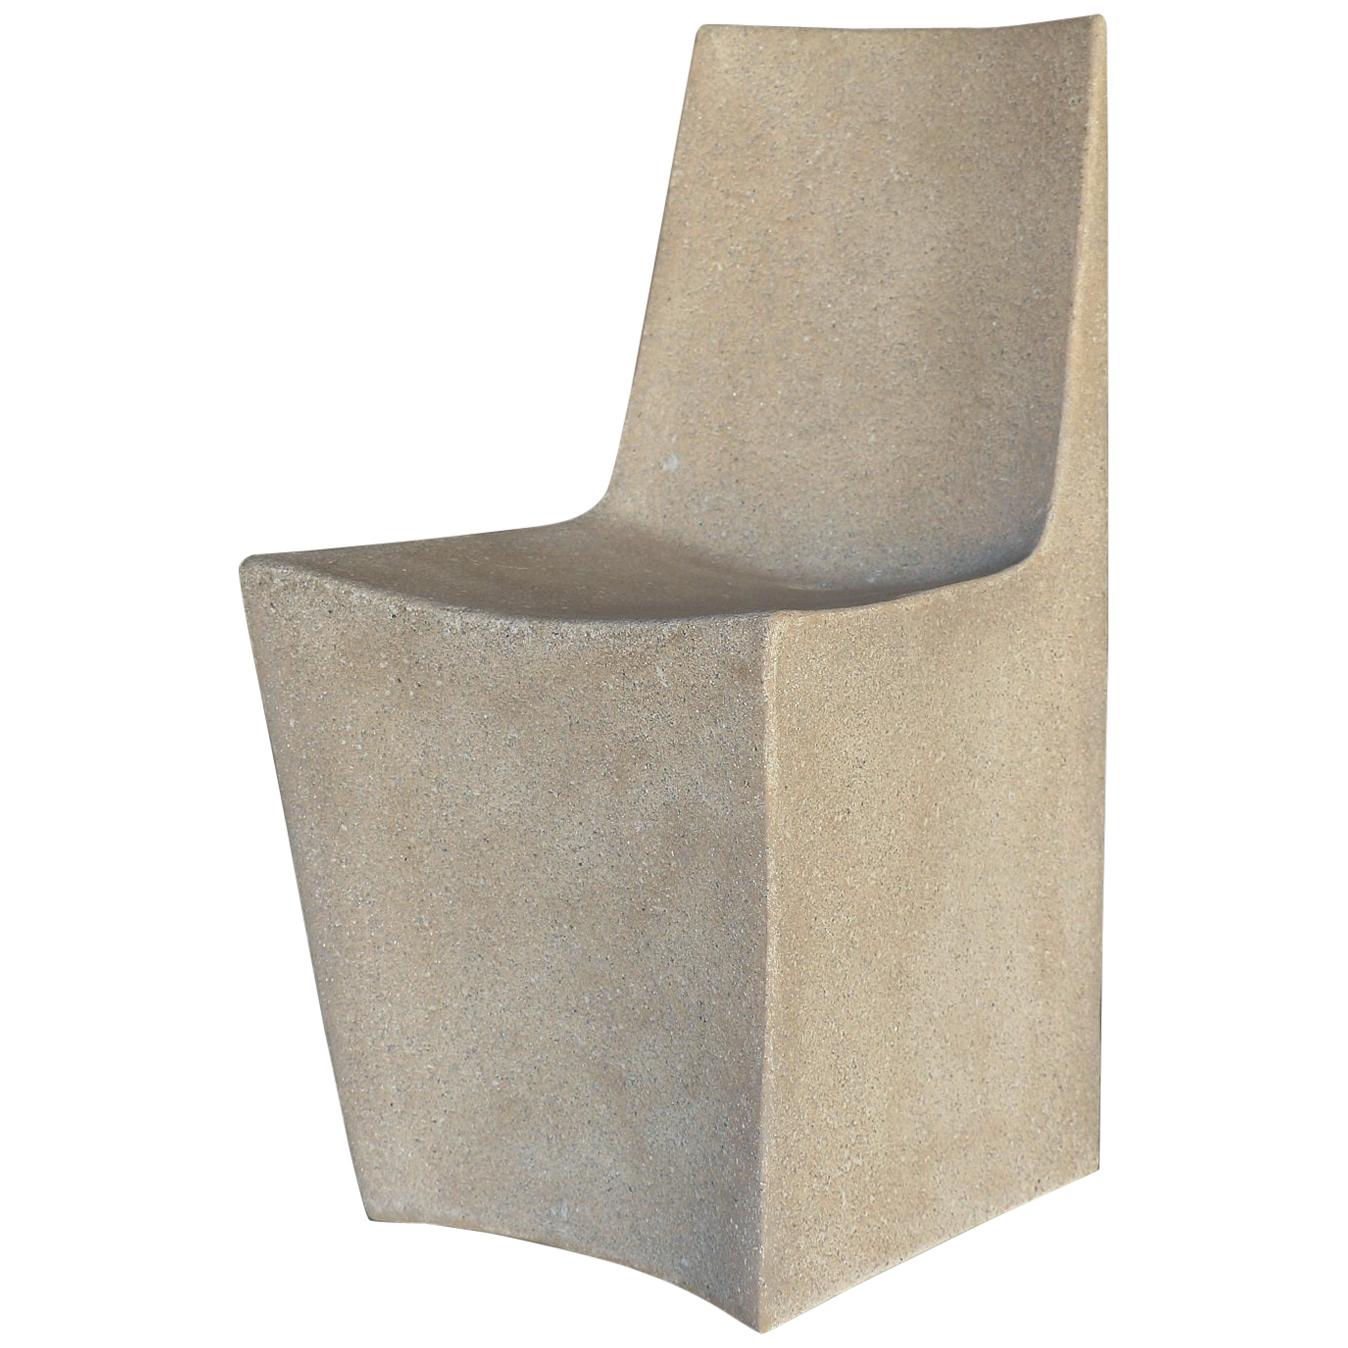 Cast Resin 'Stone' Dining Chair, Aged Stone Finish by Zachary A. Design For Sale